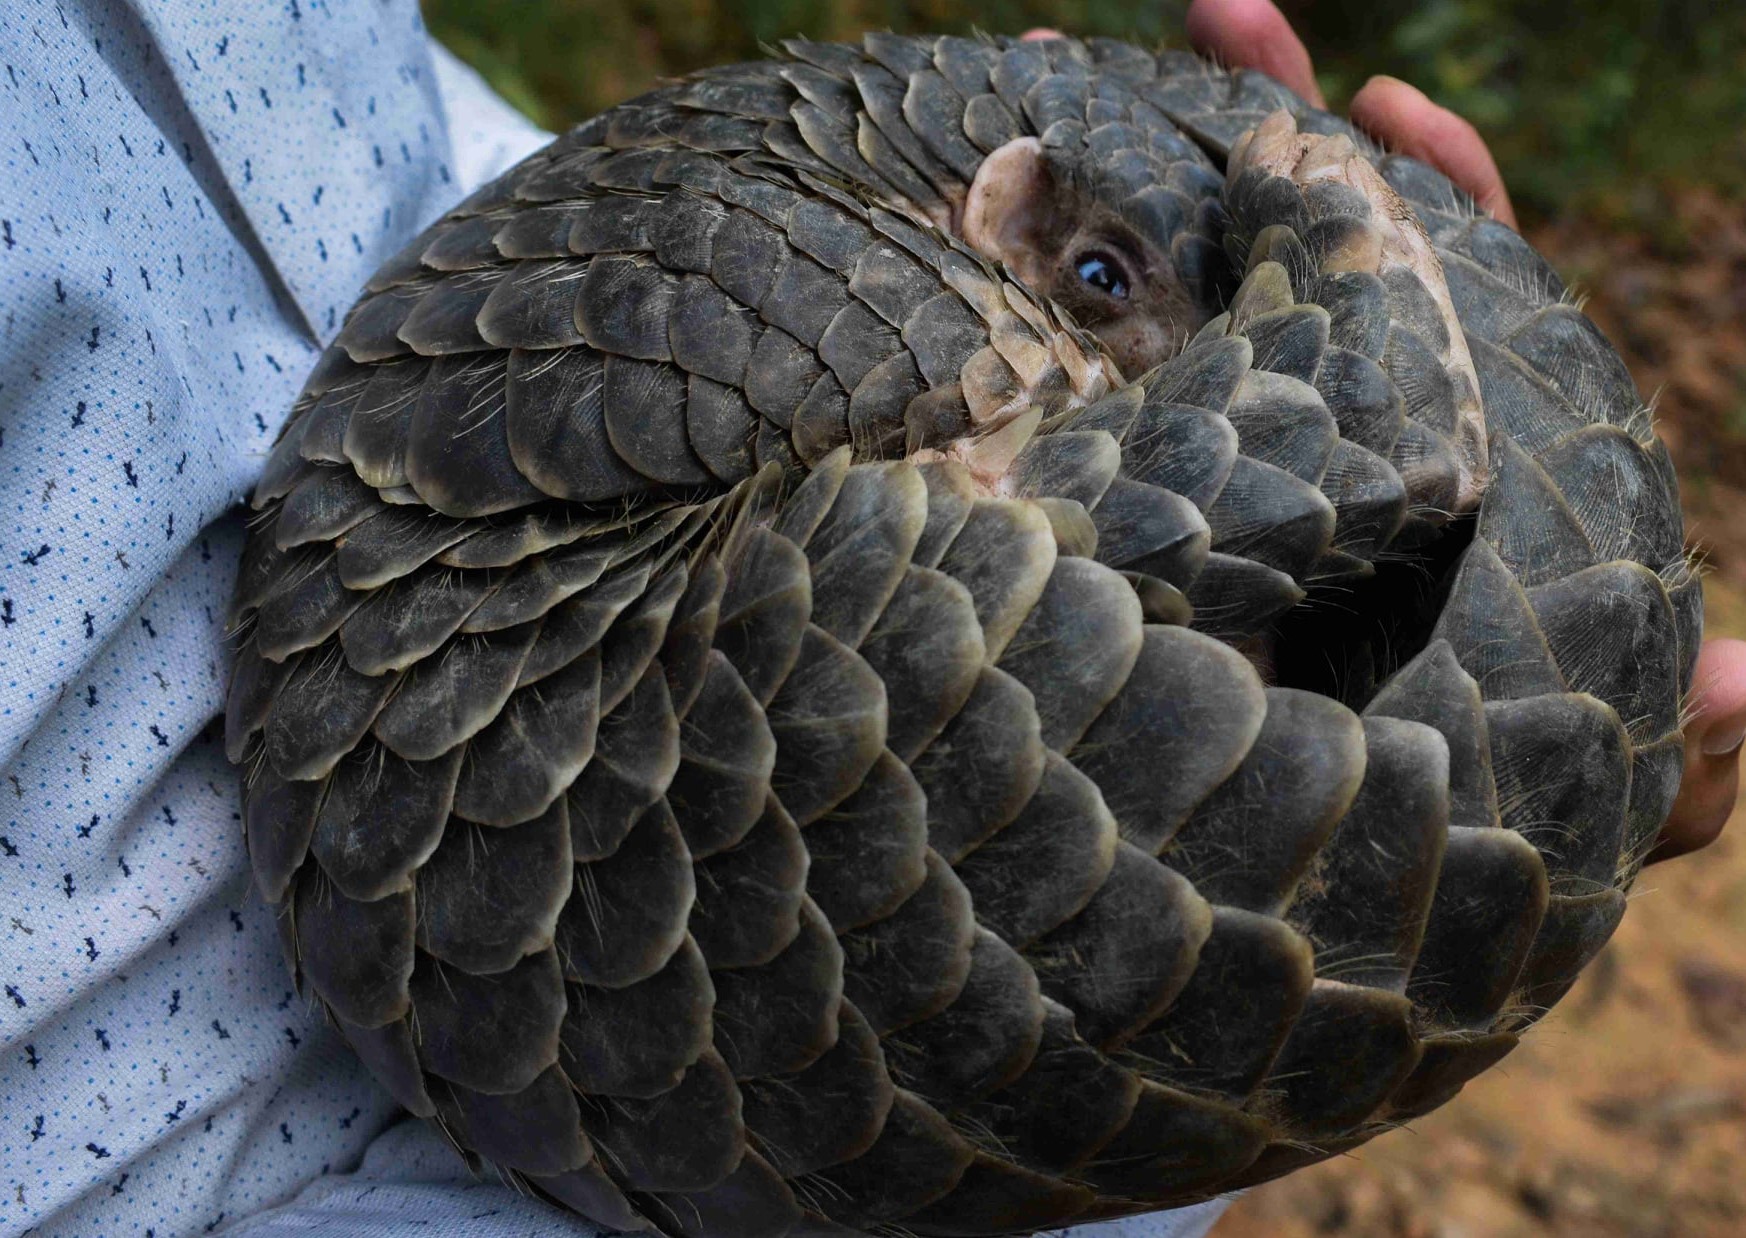 Pangolin conservation in Nepal awaits investment in 2023